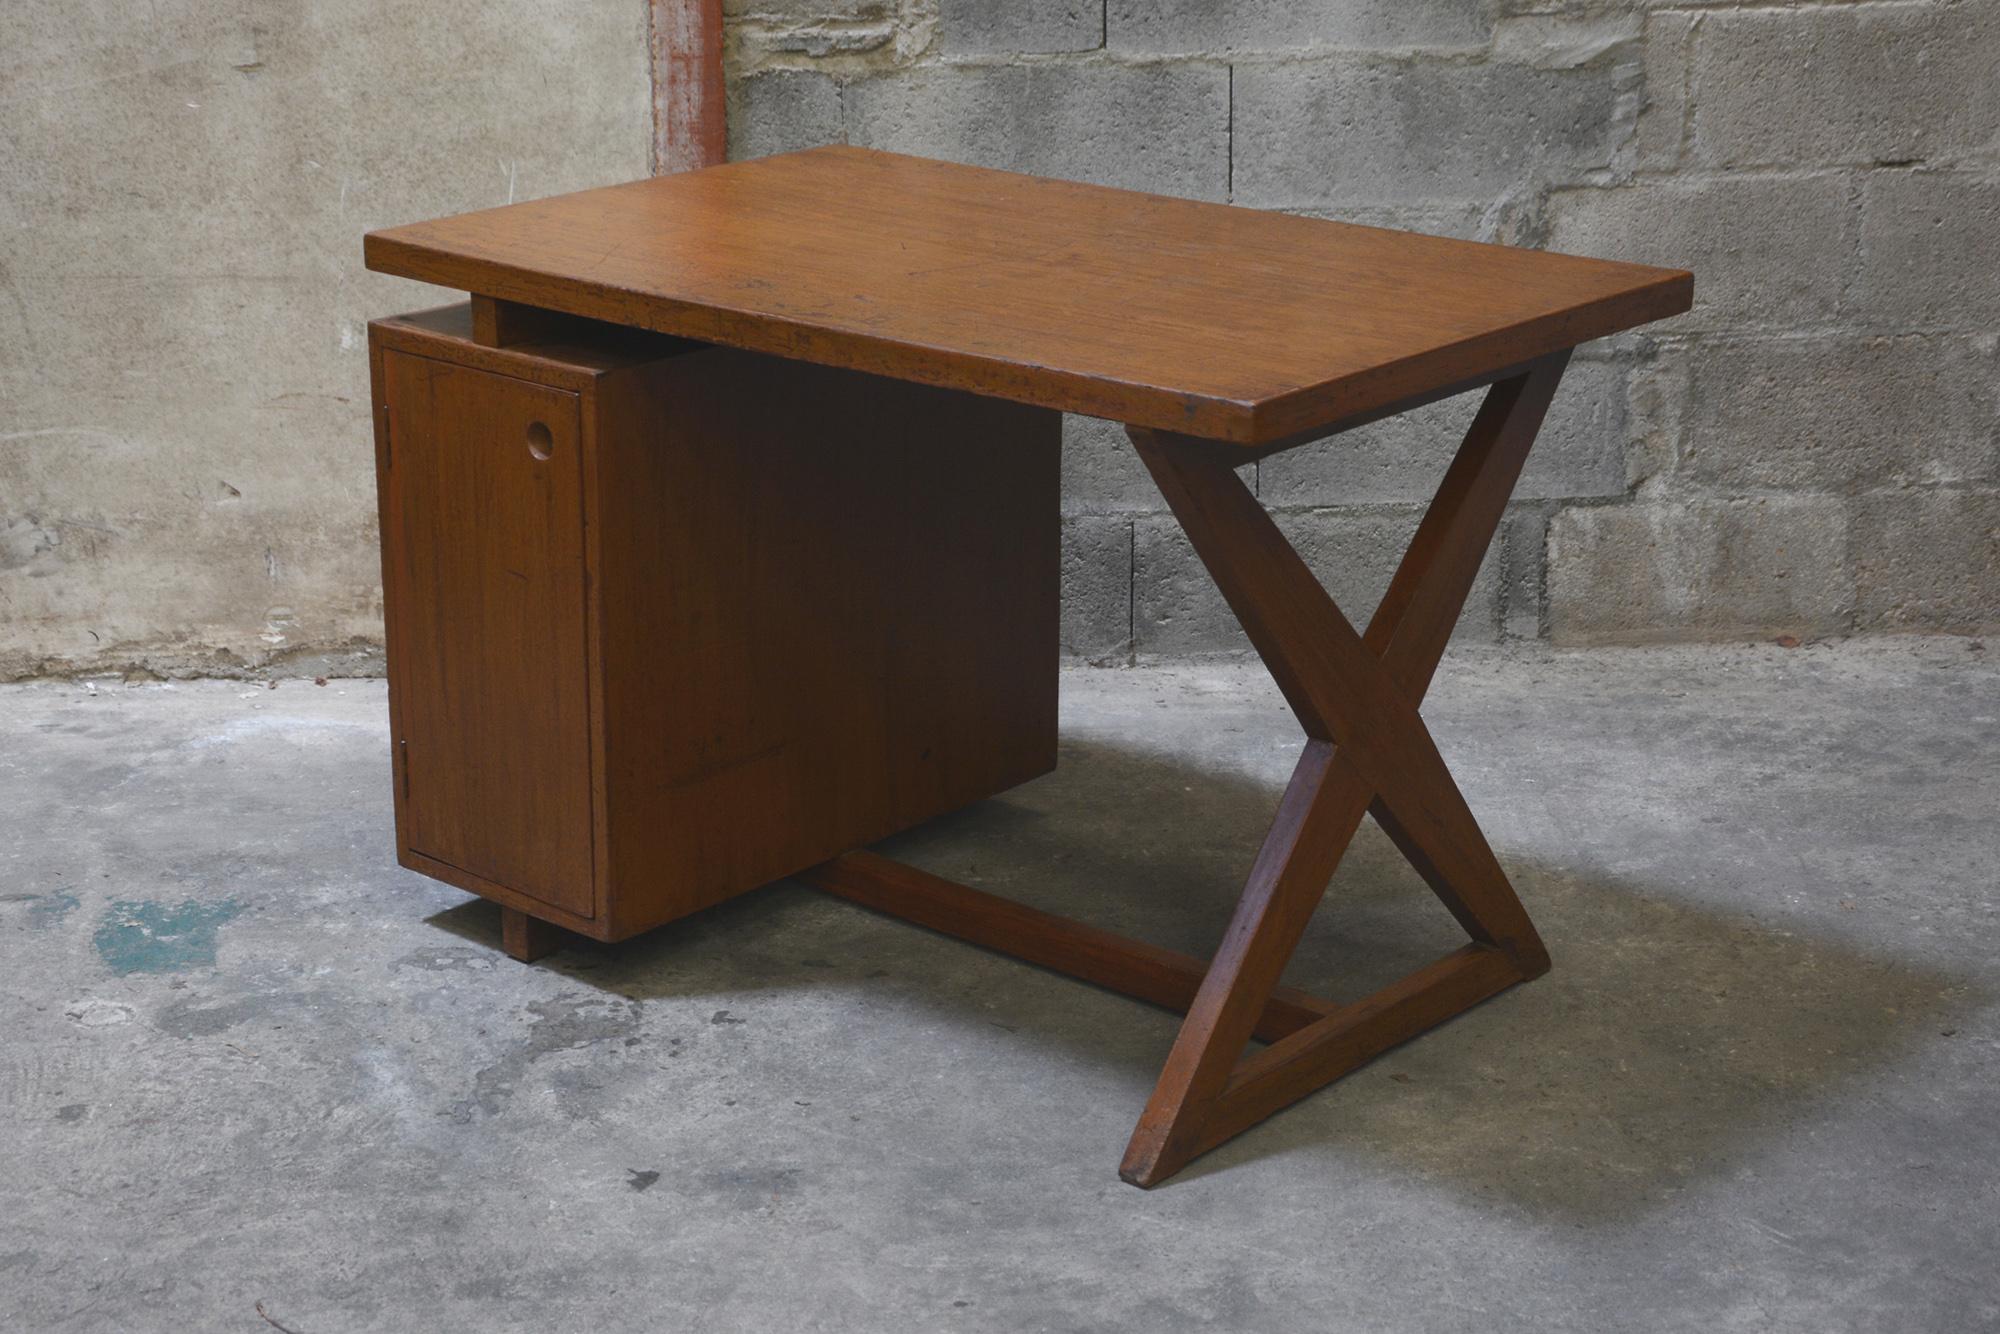 Pierre Jeanneret, rare X-shaped leg Desk designed for various administrative buildings in Chandigarh, India

Tabletop covered with plated teak inset fixed on a X-shaped leg. 4 drawers on front. Very nice patina. An iconic Pierre Jeanneret piece and